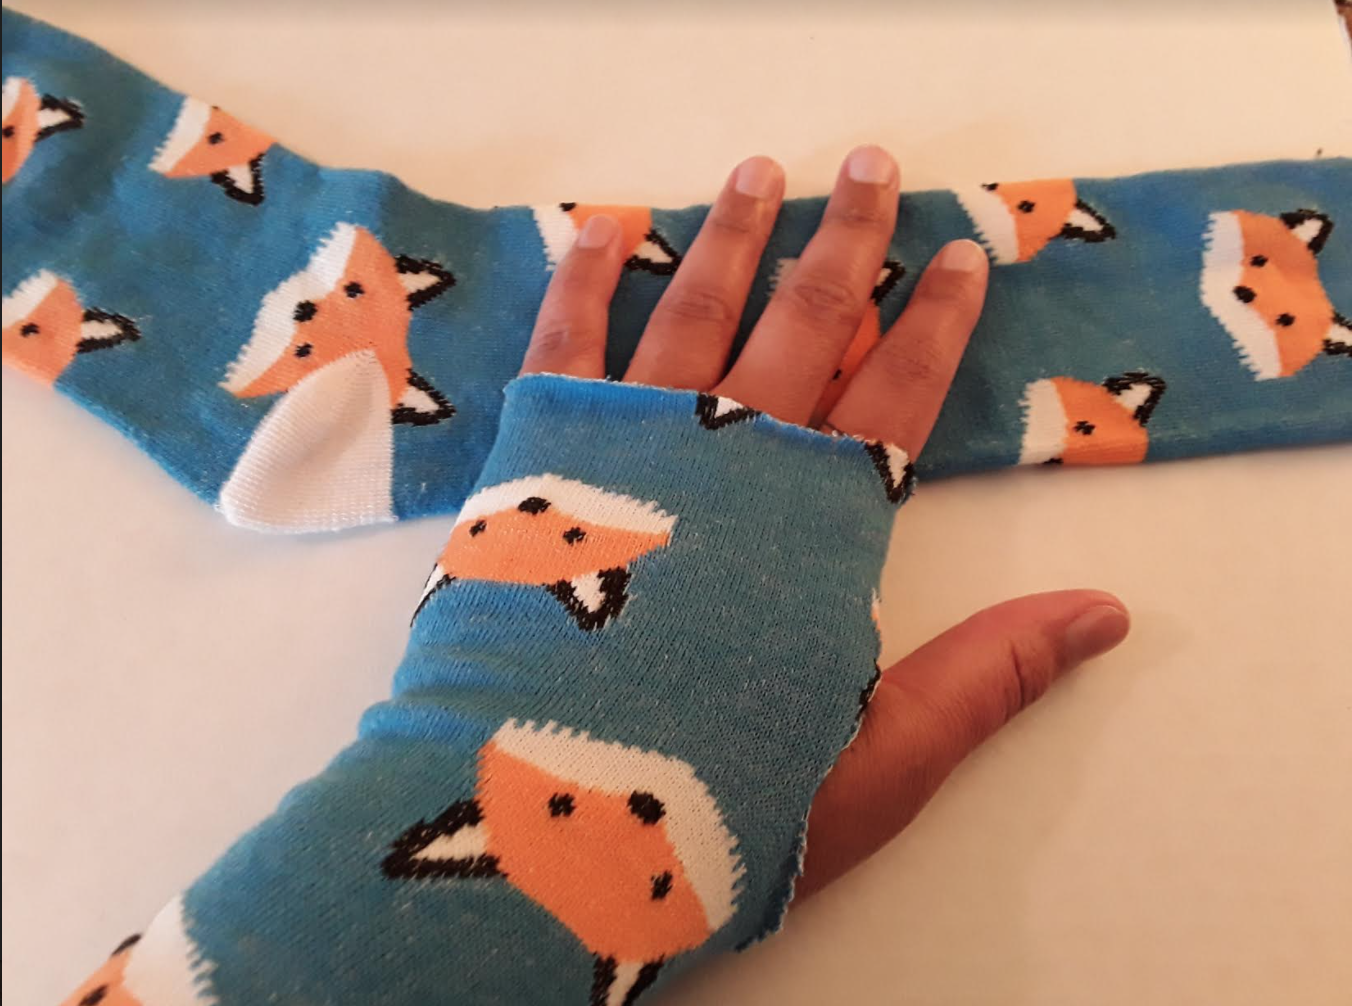 Socks with foxes on them cut into cloth wrist protectors